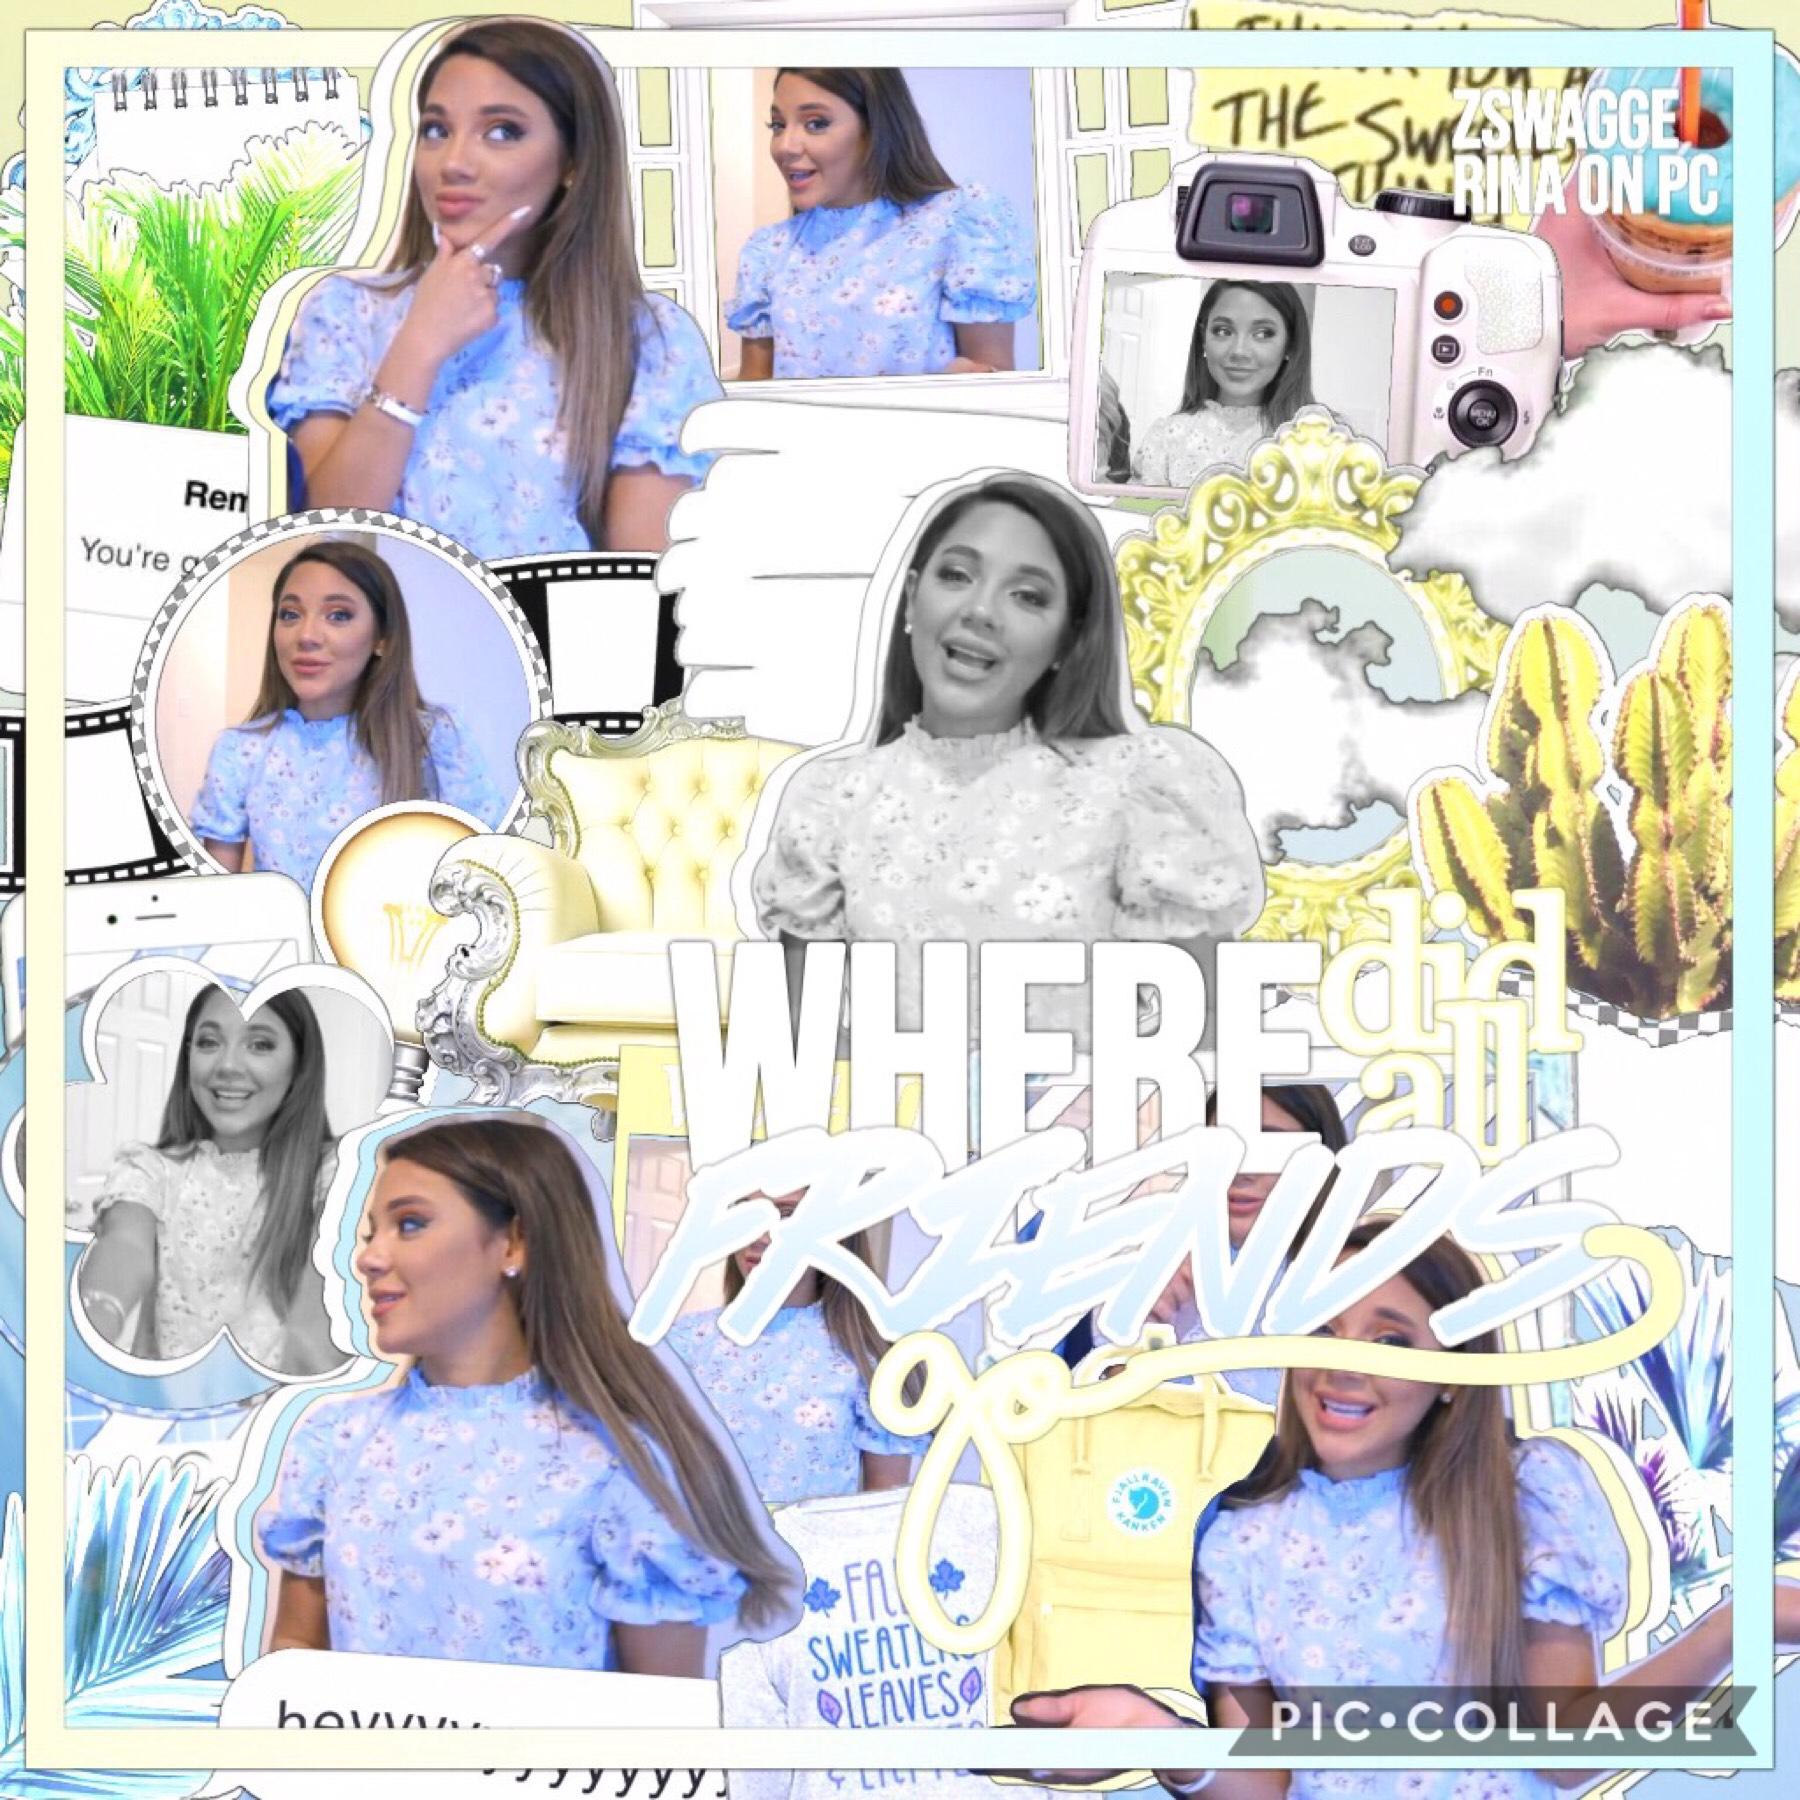 heyyy everyone ☺️💙 I literally made this edit in 20 minutes the other night lol. you like it? ✨ also, how is your weekend going? 🌱🌩 hope you're having a better one than mine, I need to study! ugh, wish me luck! ♡ 